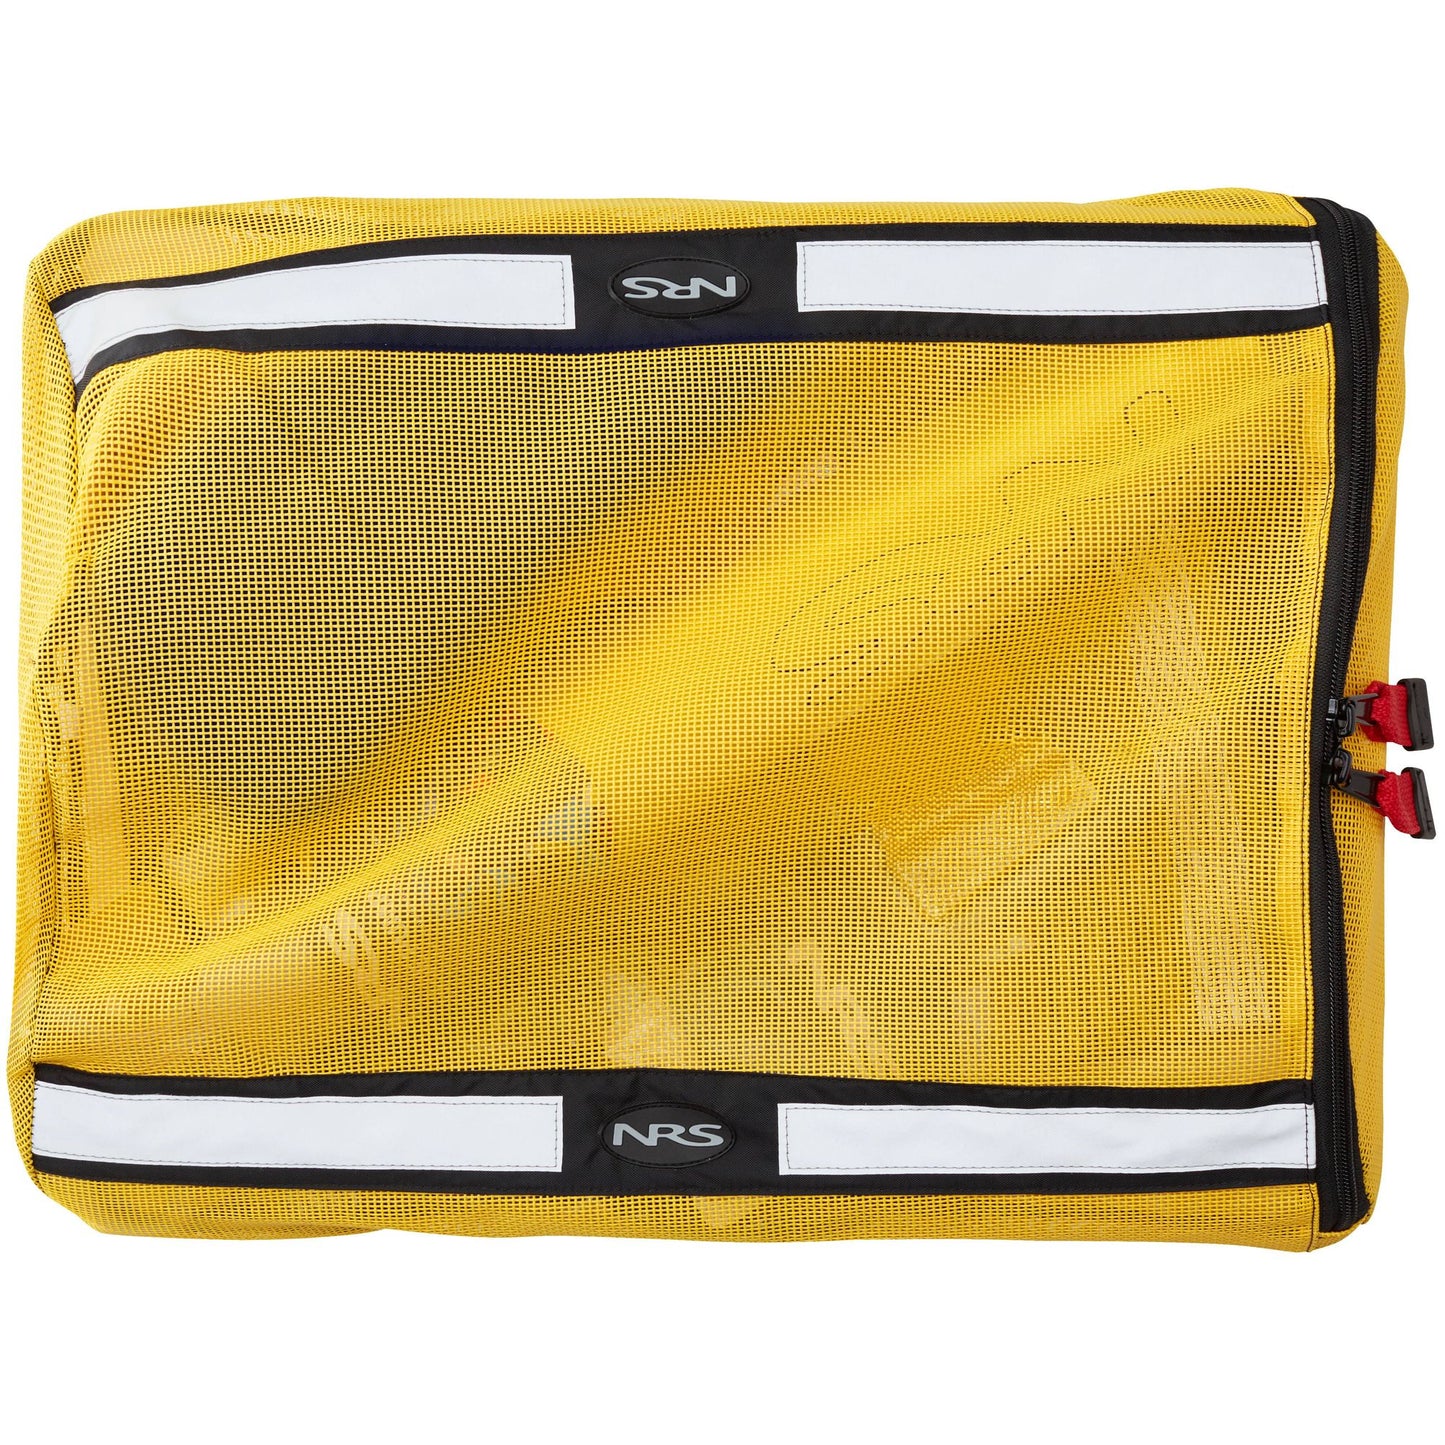 NRS Deluxe Touring Safety Kit, paquete de seguridad